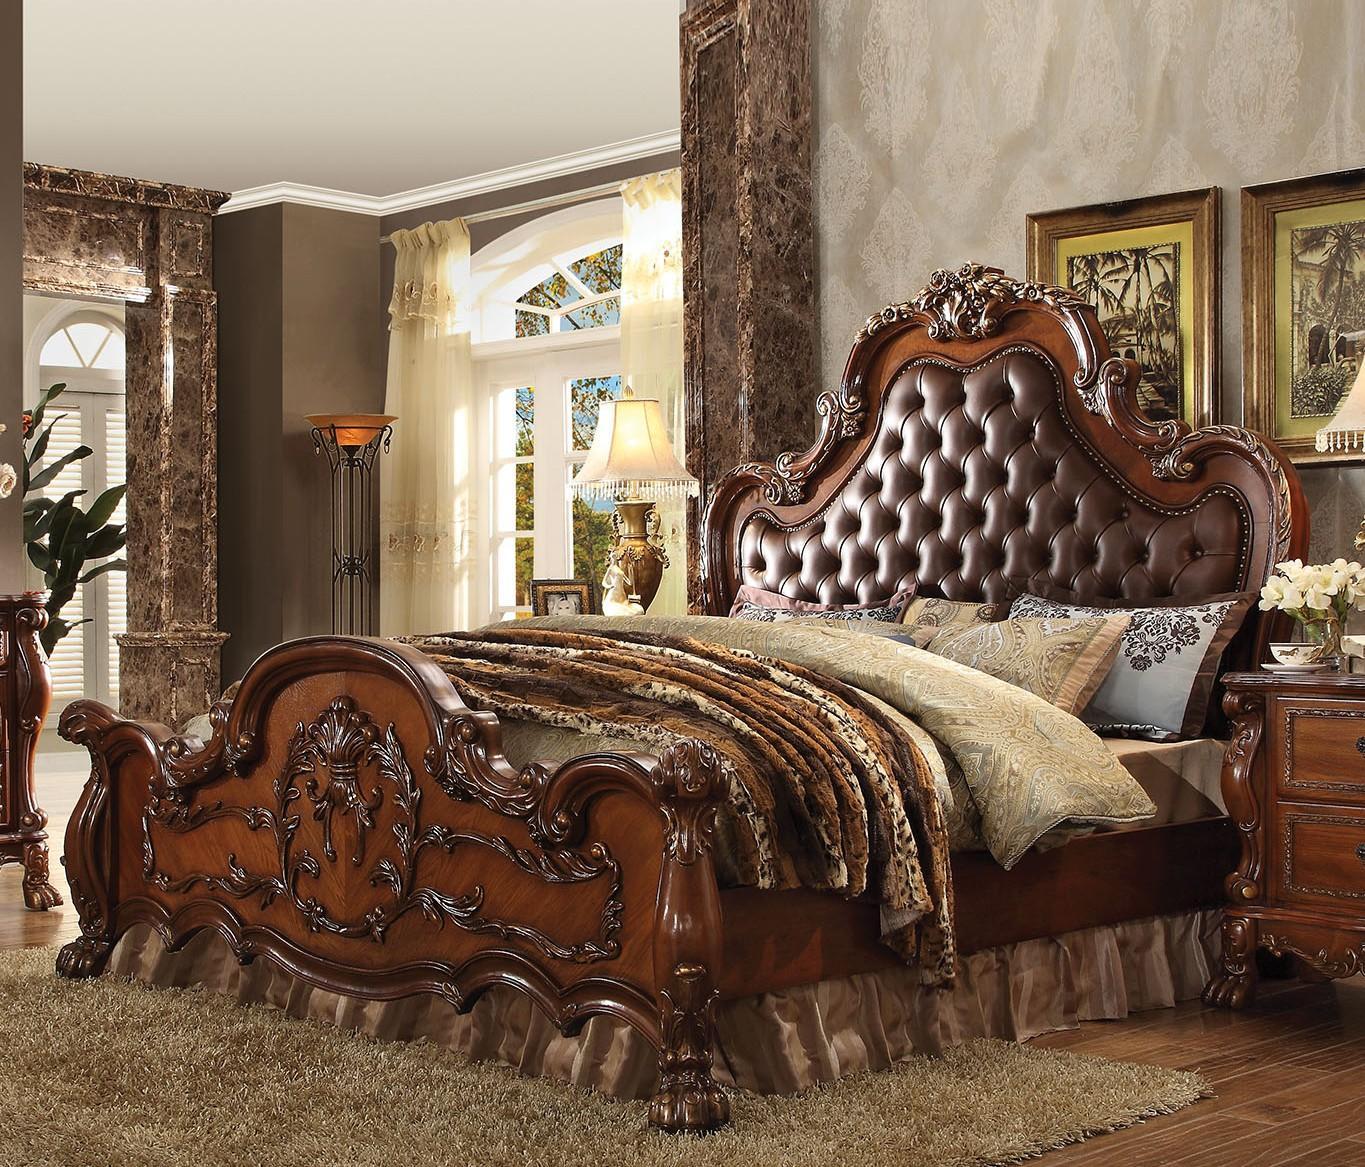 

    
Luxury Tufted PU Cherry Oak Perales King Bedroom Set 3 Traditional Carved Wood
